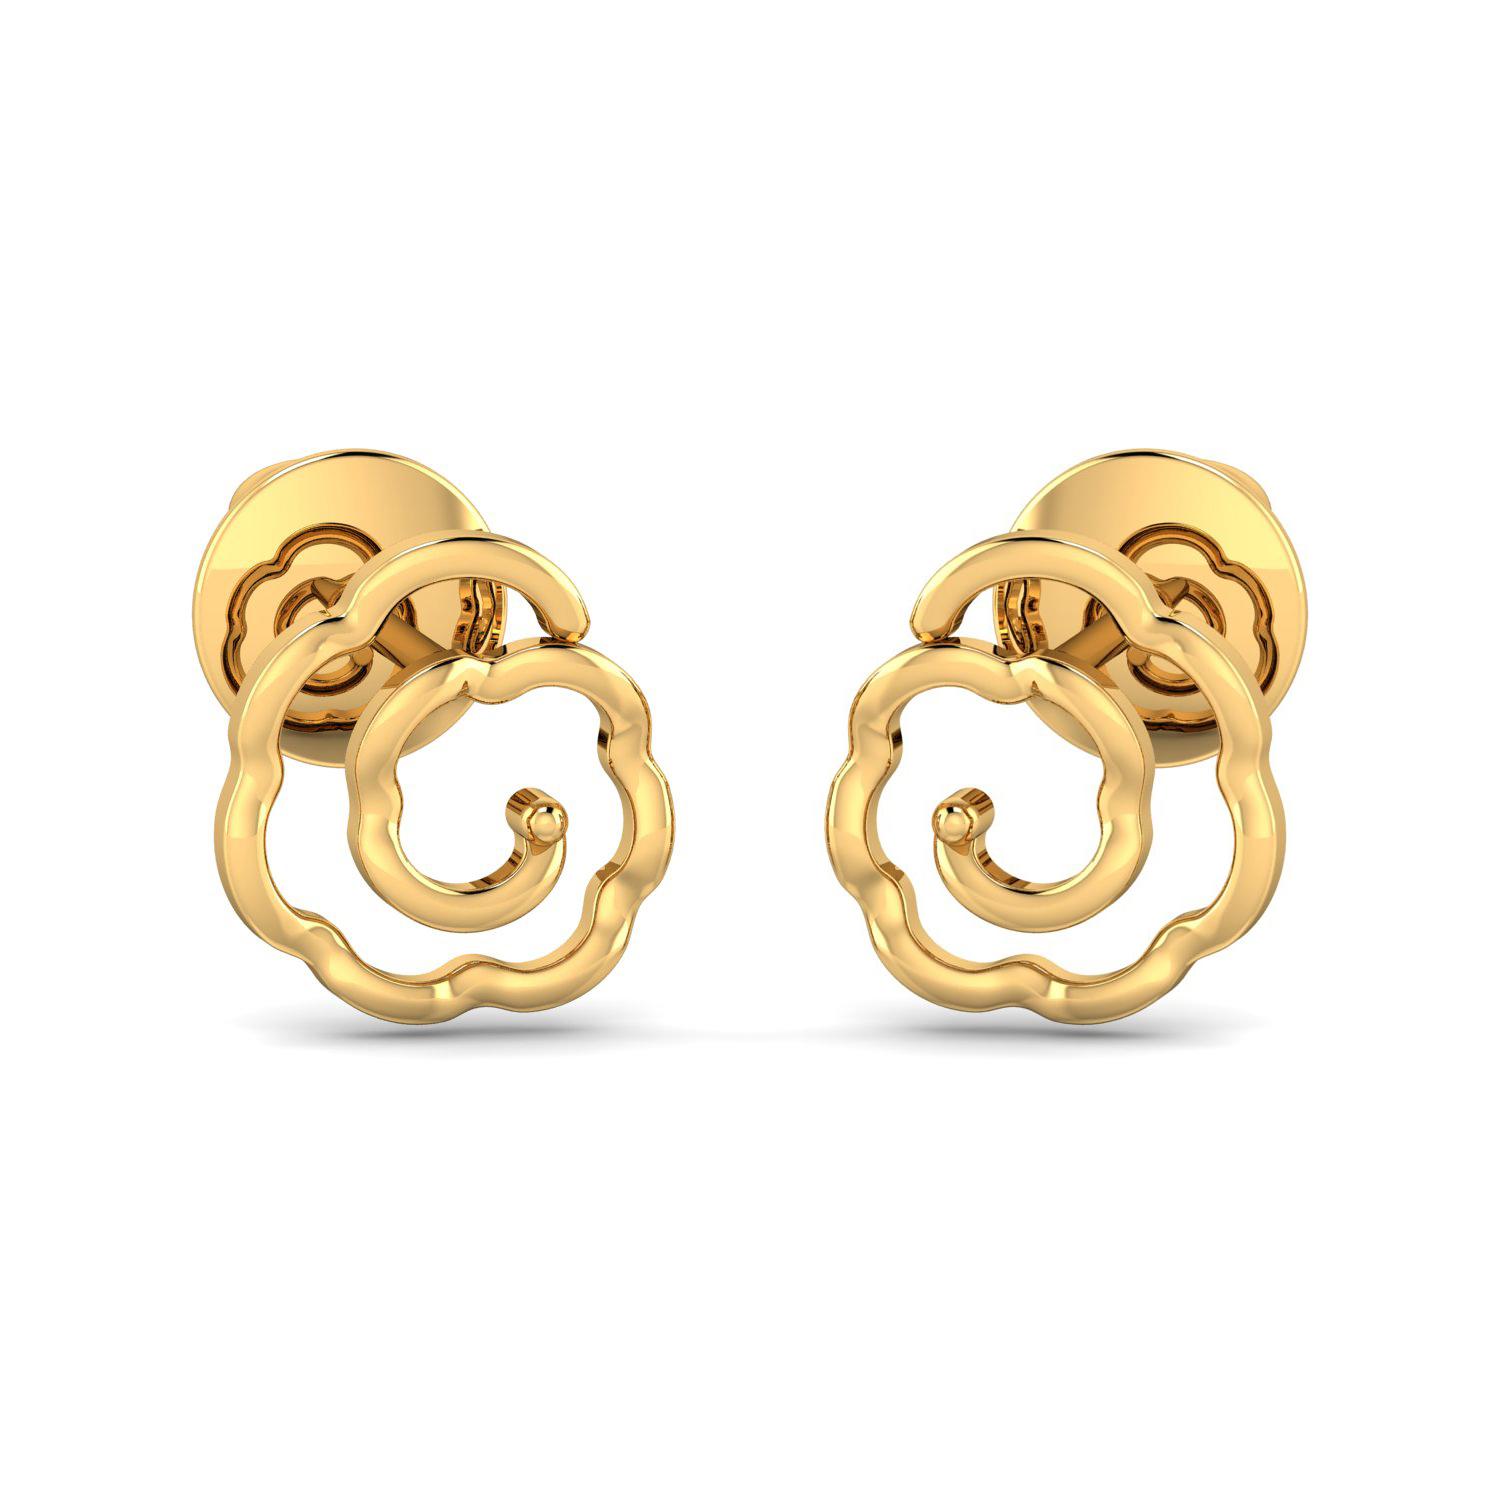 Home Gold Gold Earrings Gold Studs